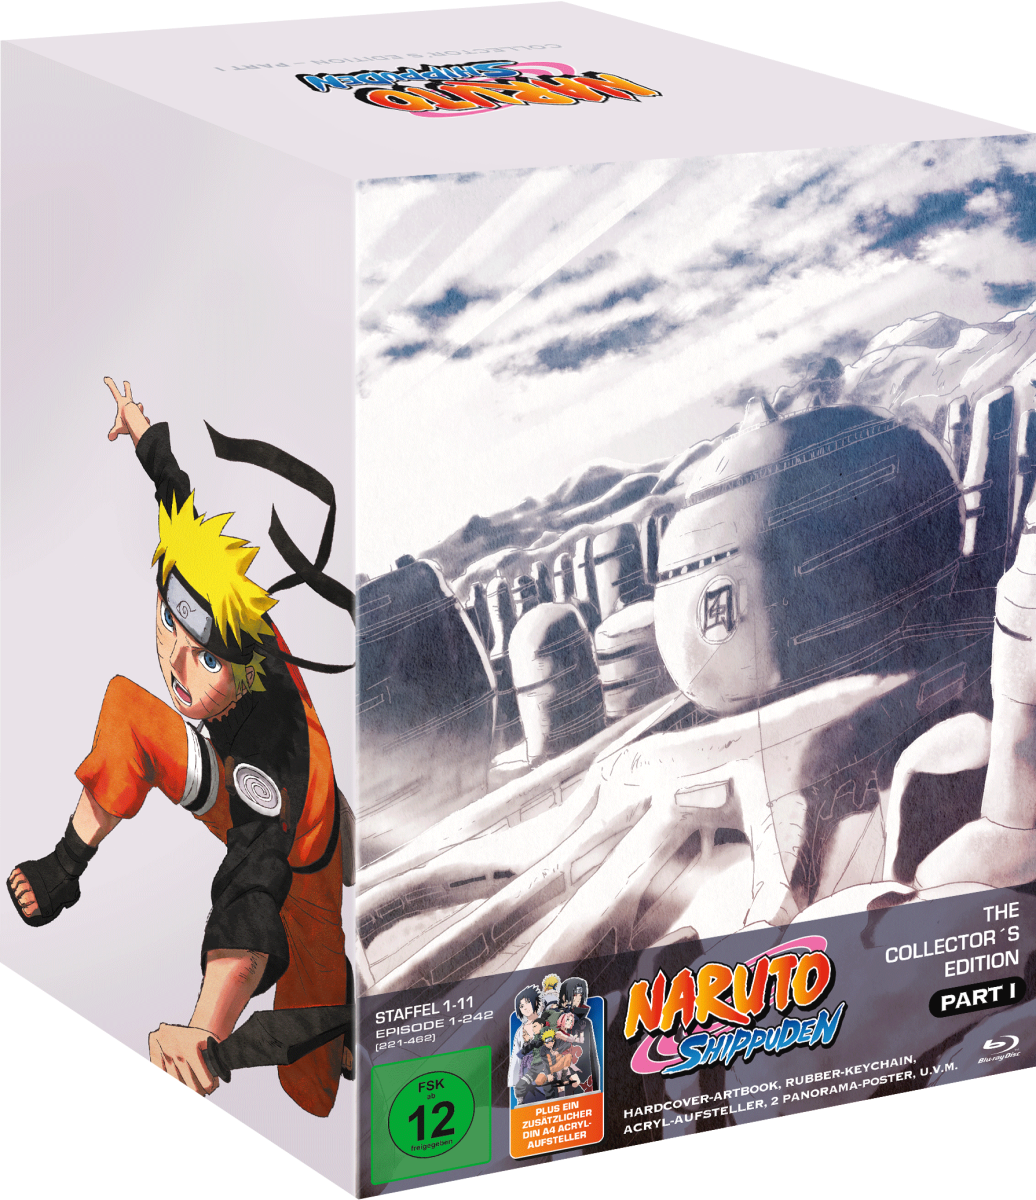 Naruto Shippuden - Collector's Edition Part 1 [Blu-ray] Image 3